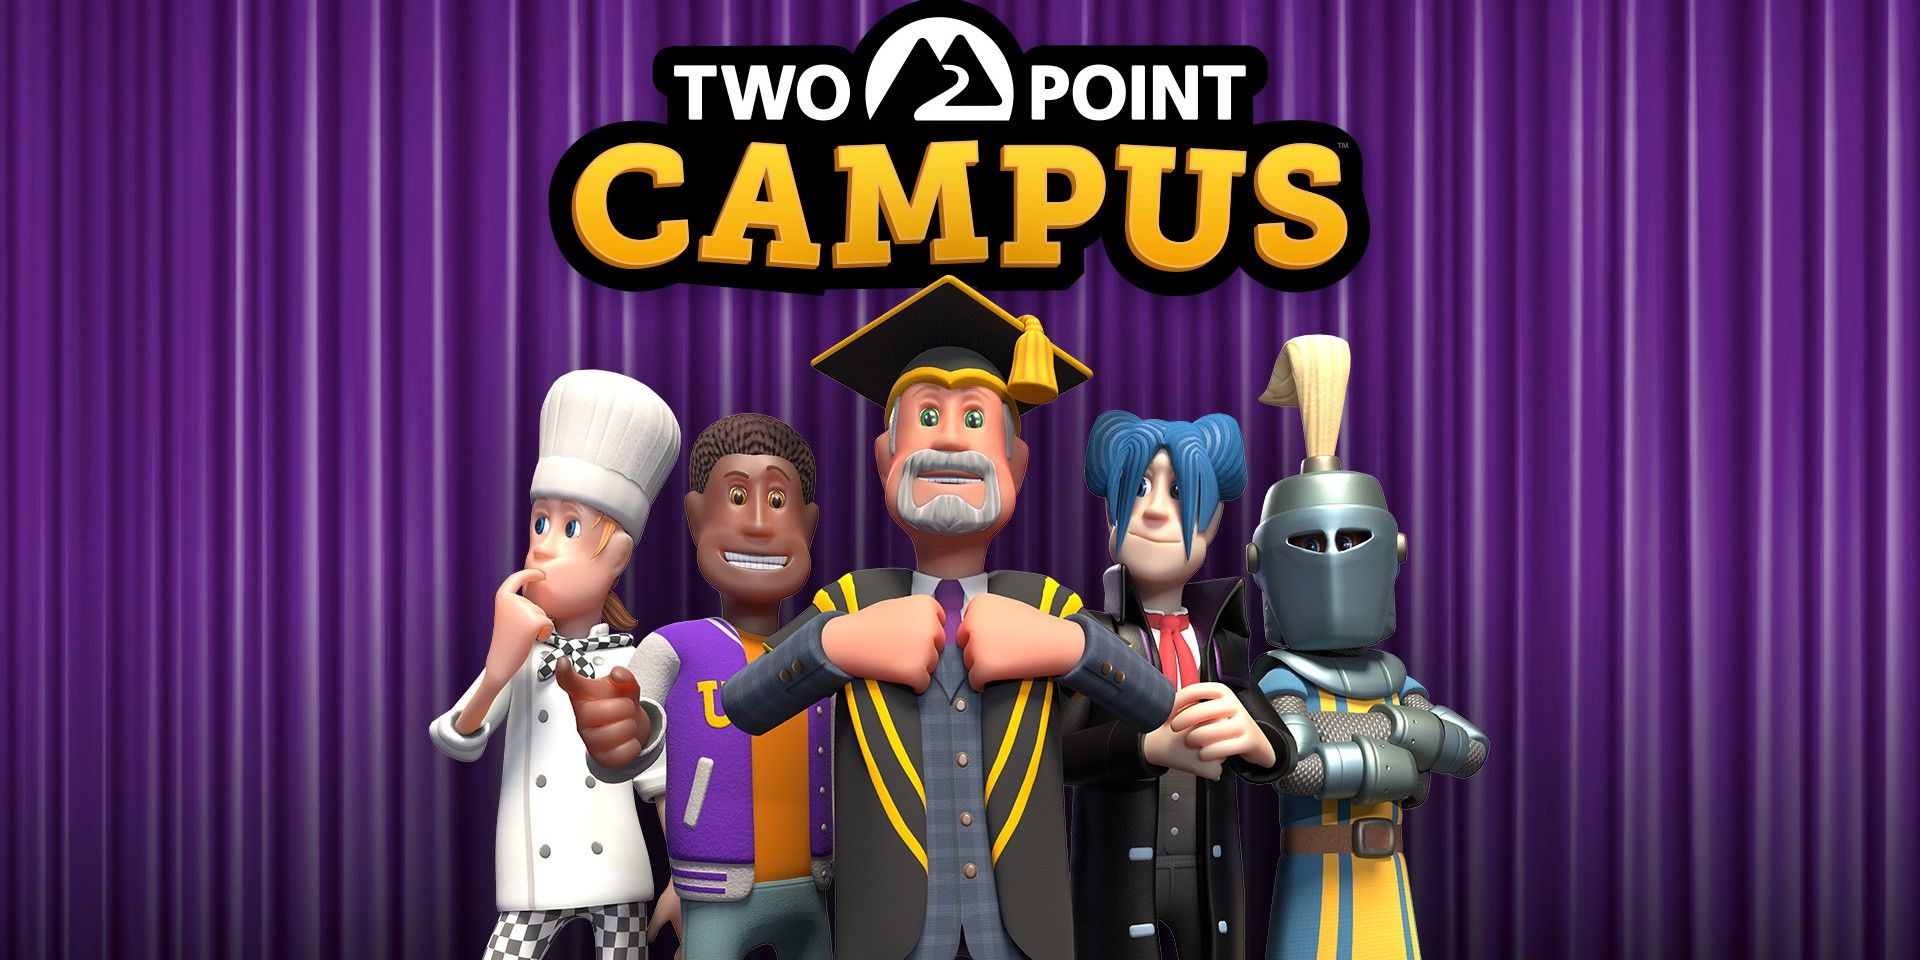 Two Point Campus promotional title art.